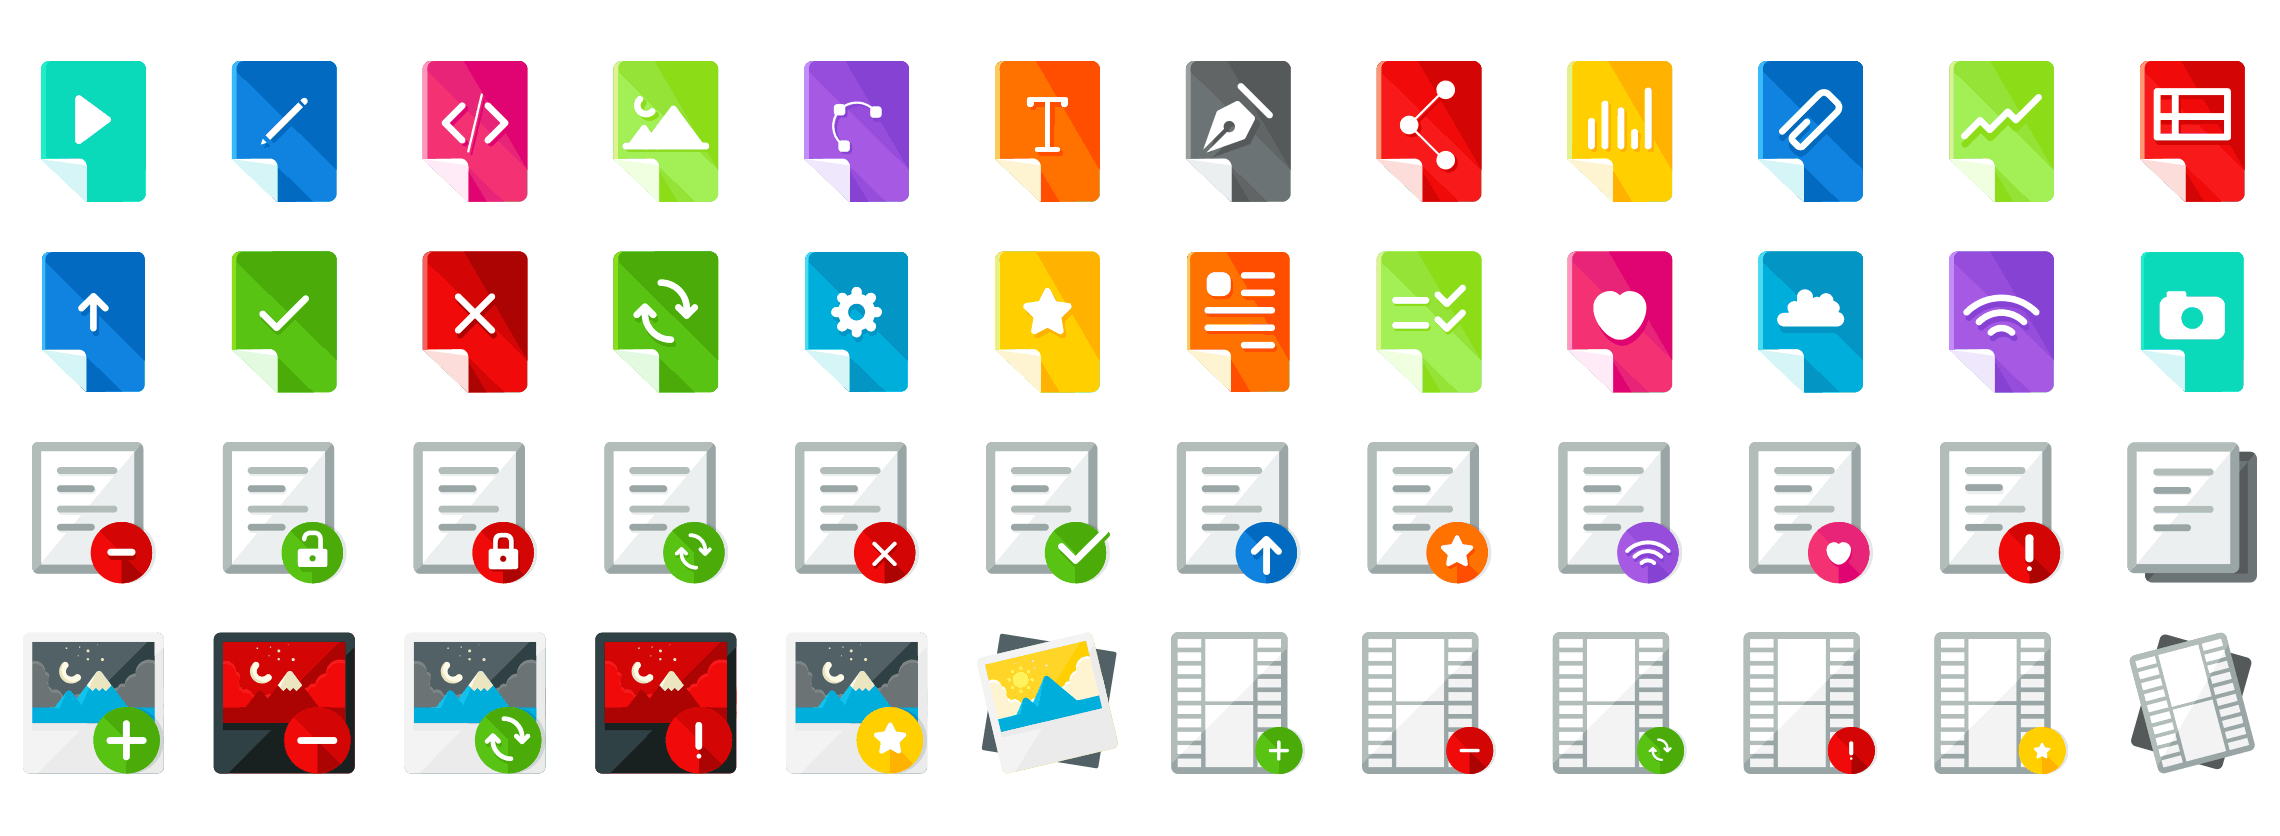 Files-flat-icons